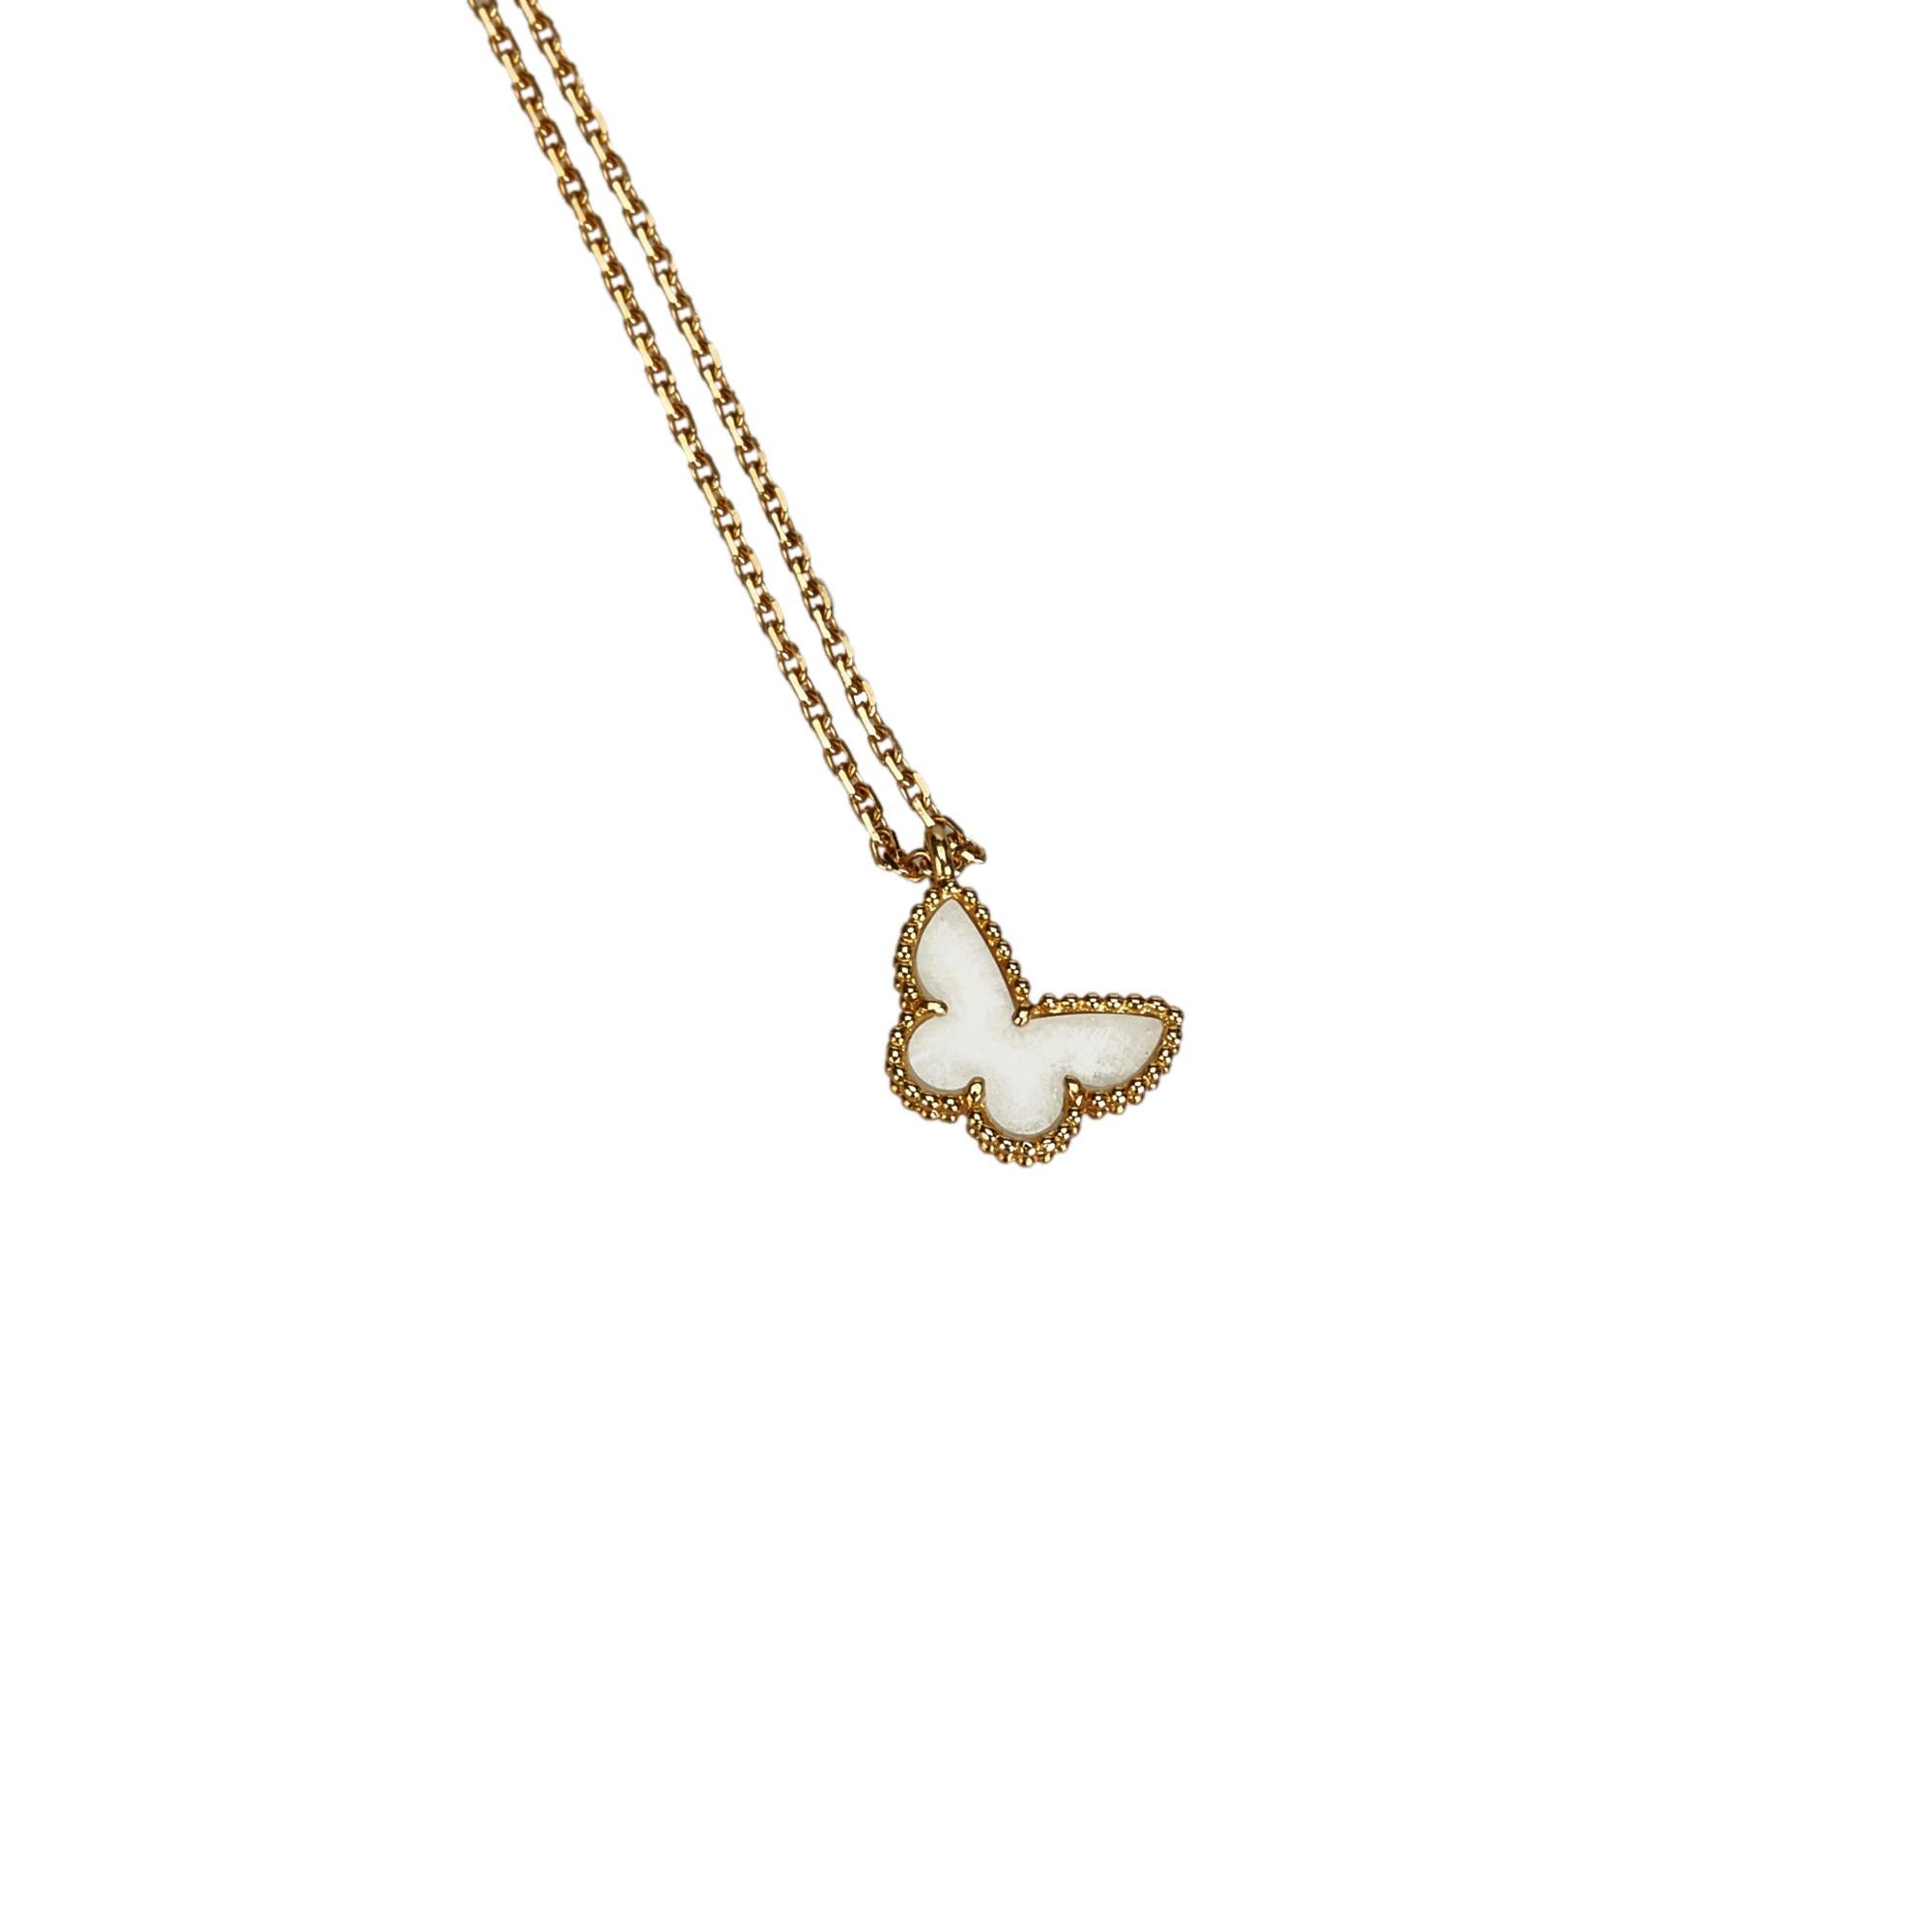 The Sweet Alhambra Butterfly Pendant necklace features an 18k Yellow Gold chain, mother of pearl pendant, and a lobster claw closure. It carries as A condition rating.

Inclusions: 
Box

Dimensions:
Length: 1.00 cm
Width: 1.00 cm

Material: Metal x